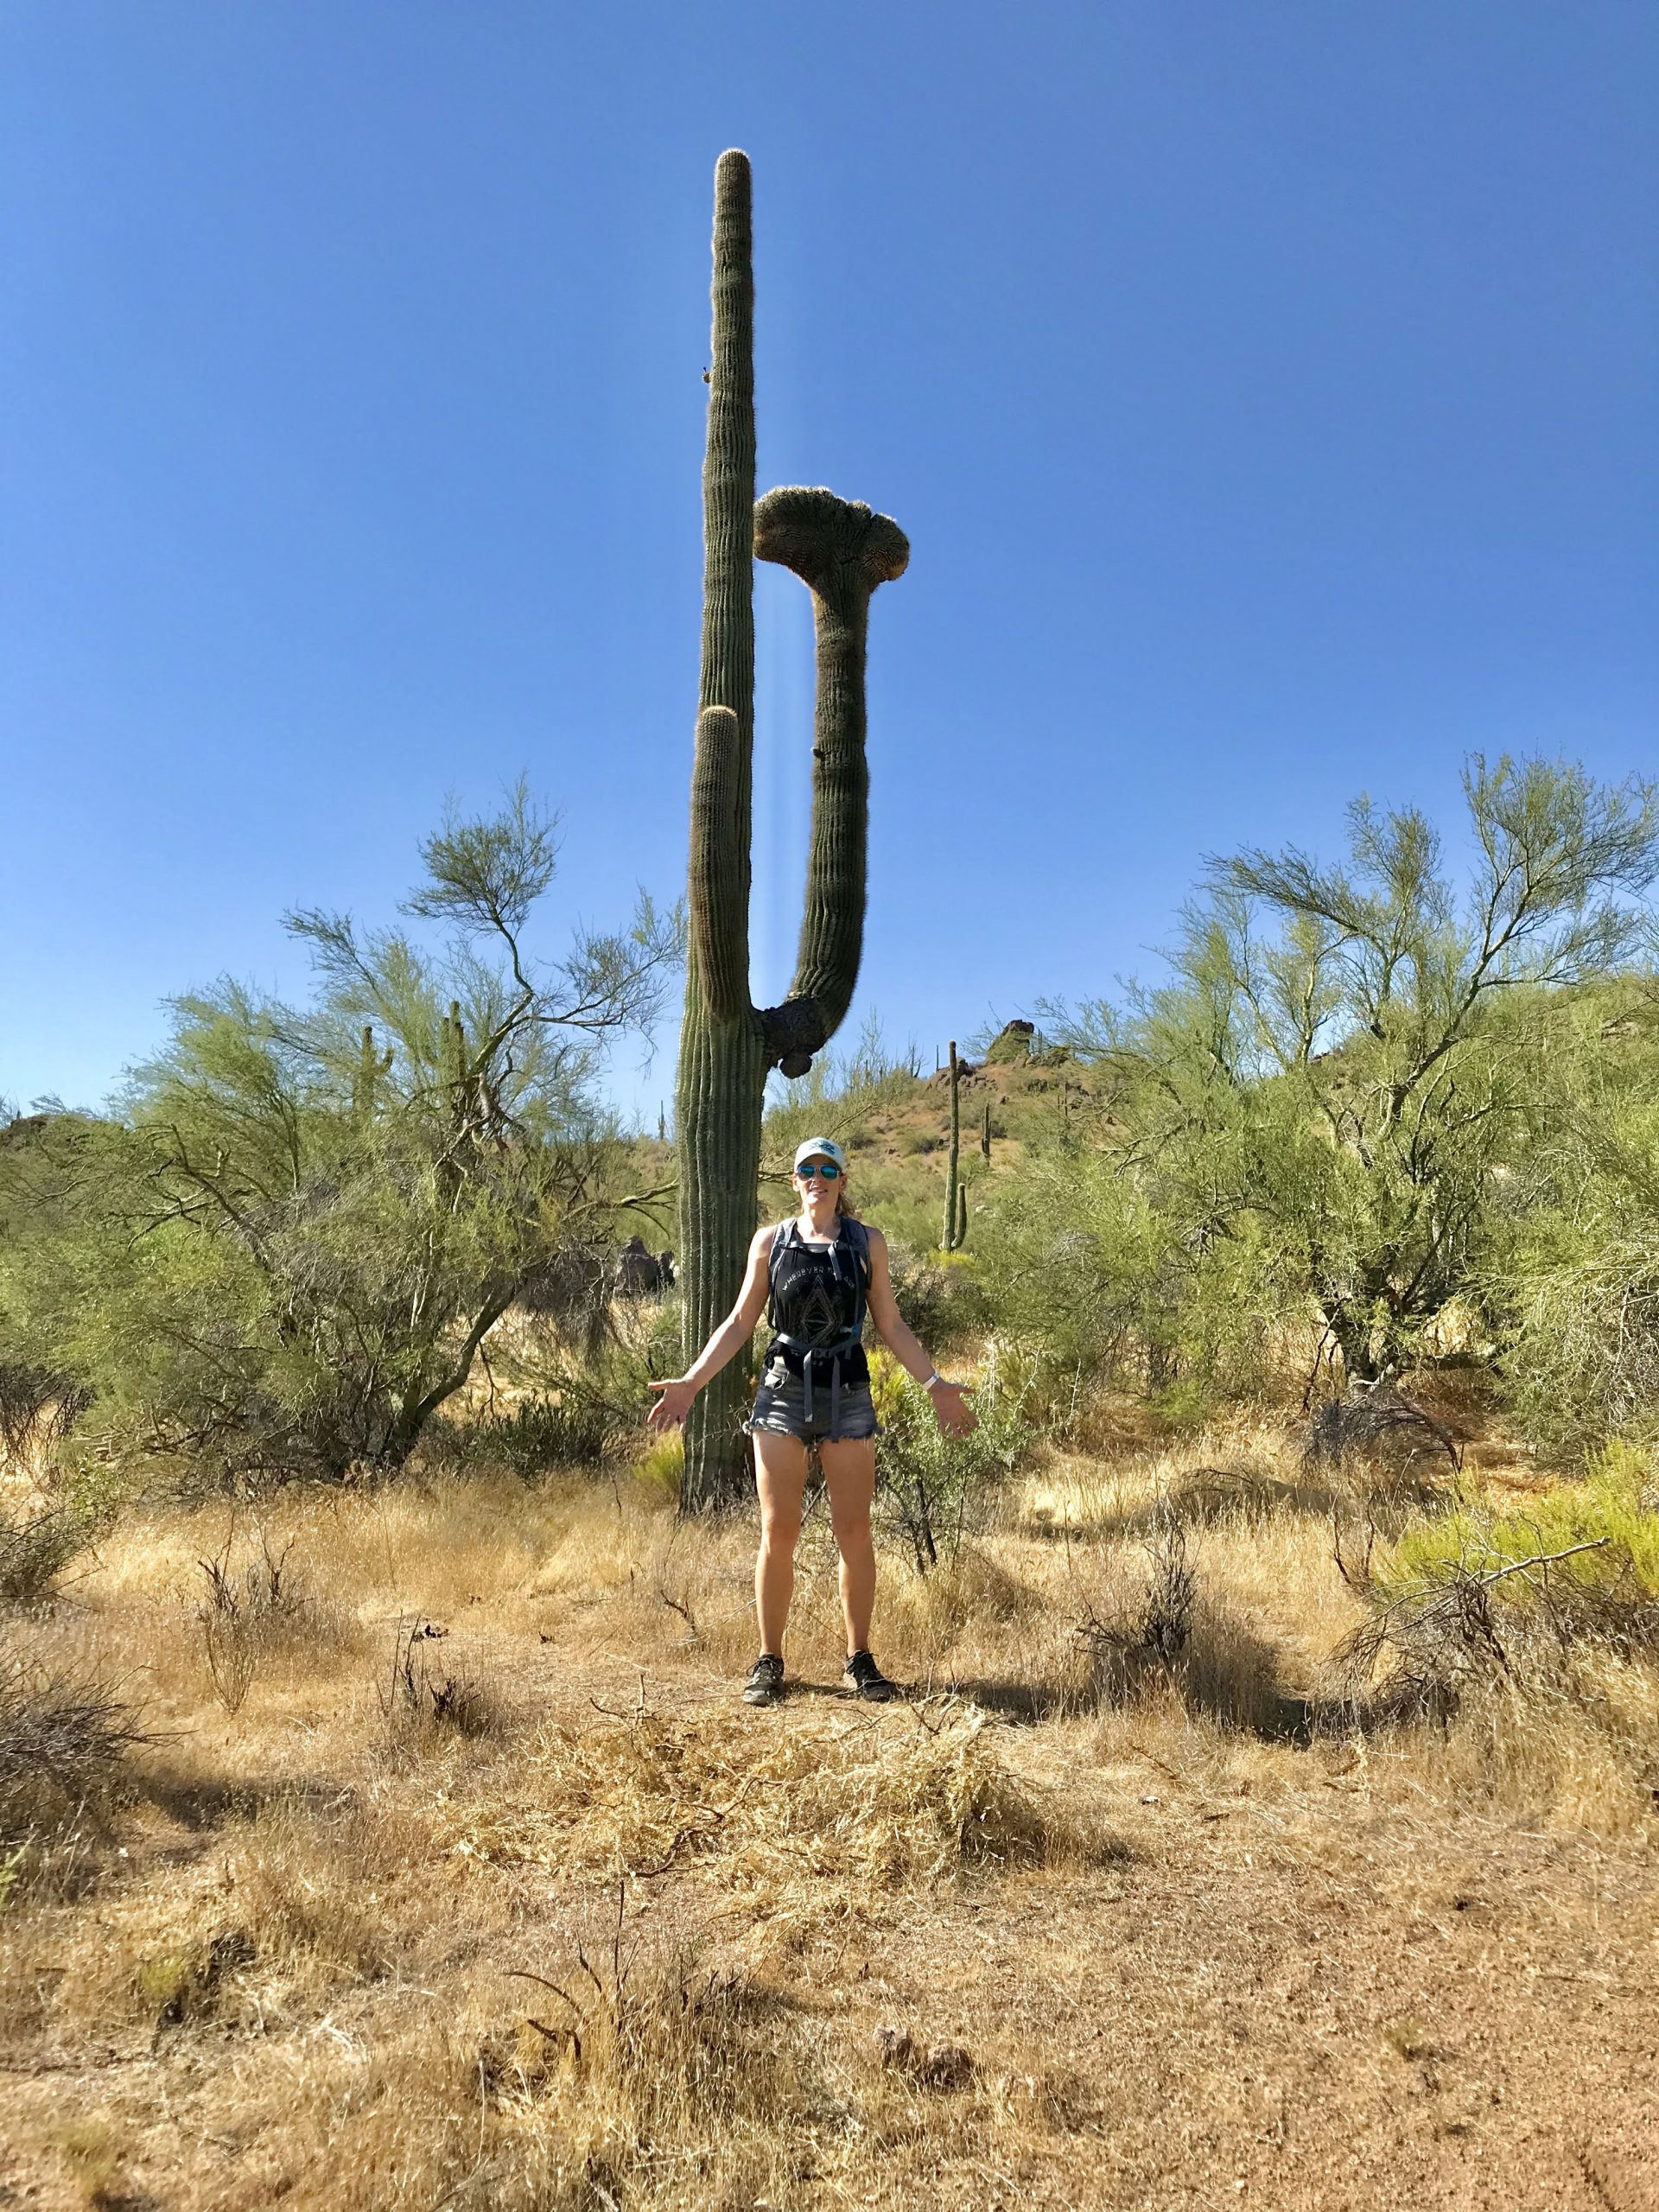 136th St Express/Cow Poke Trail found a crested saguaro